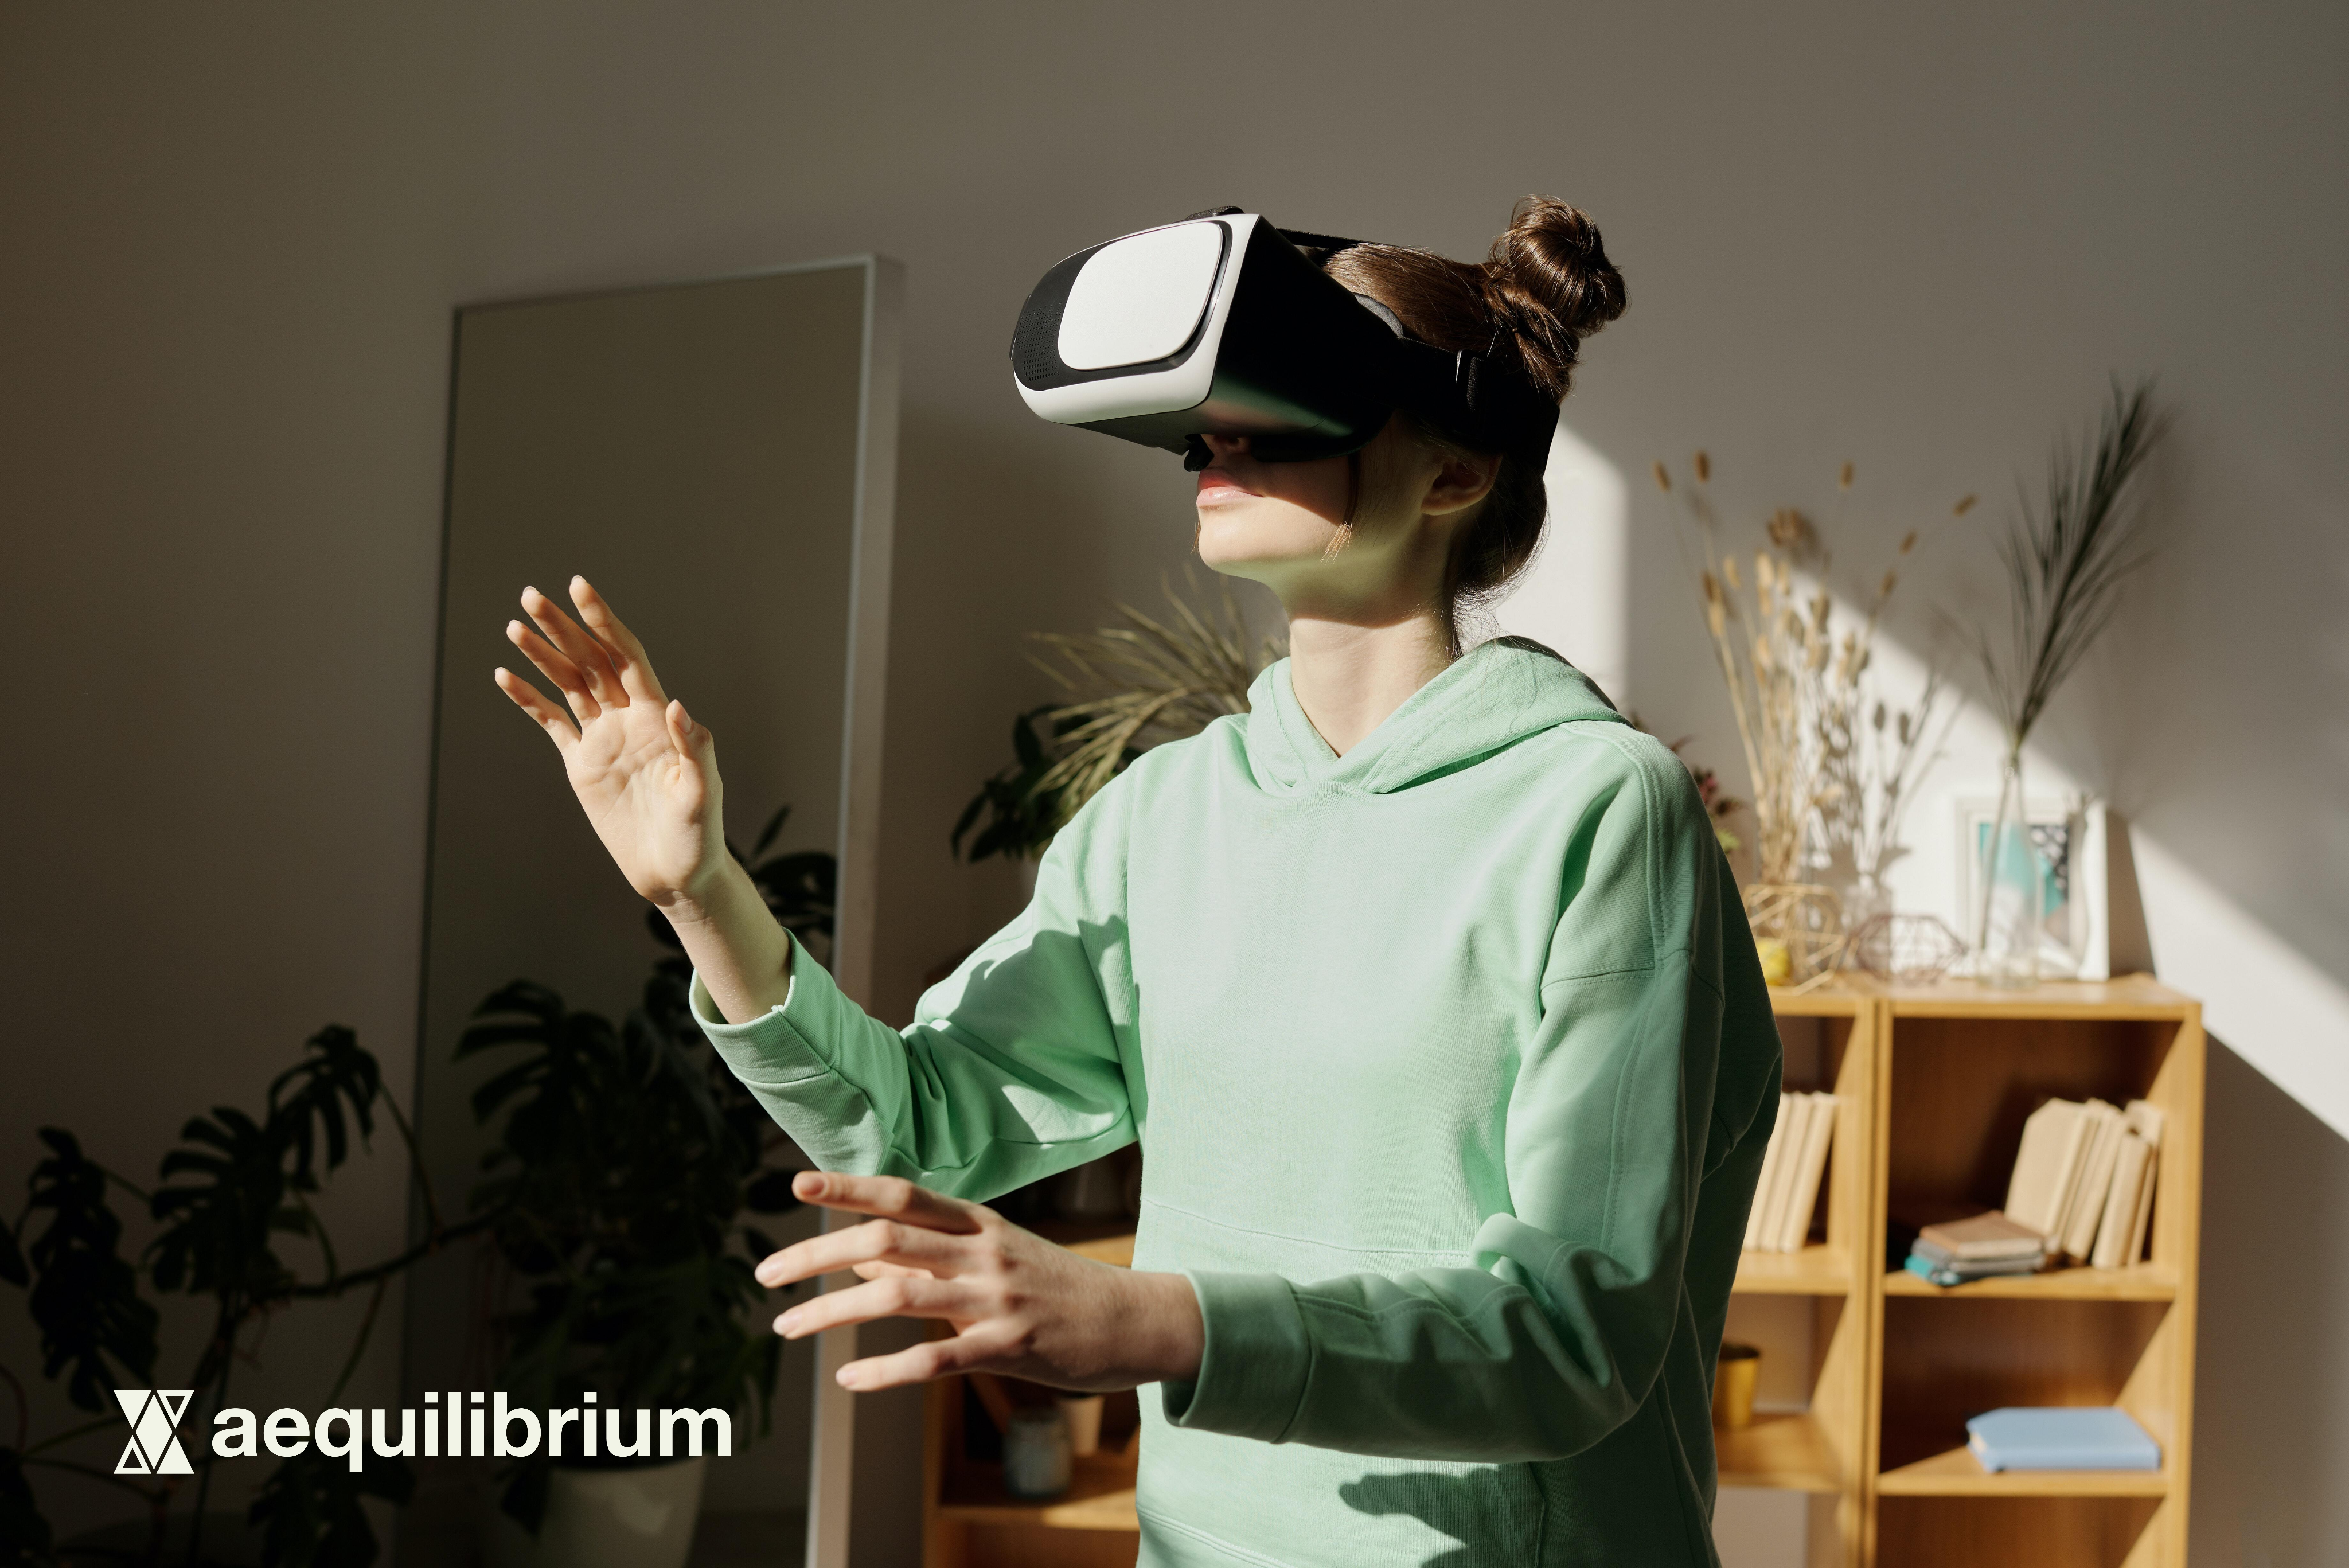 A woman using a VR headset.